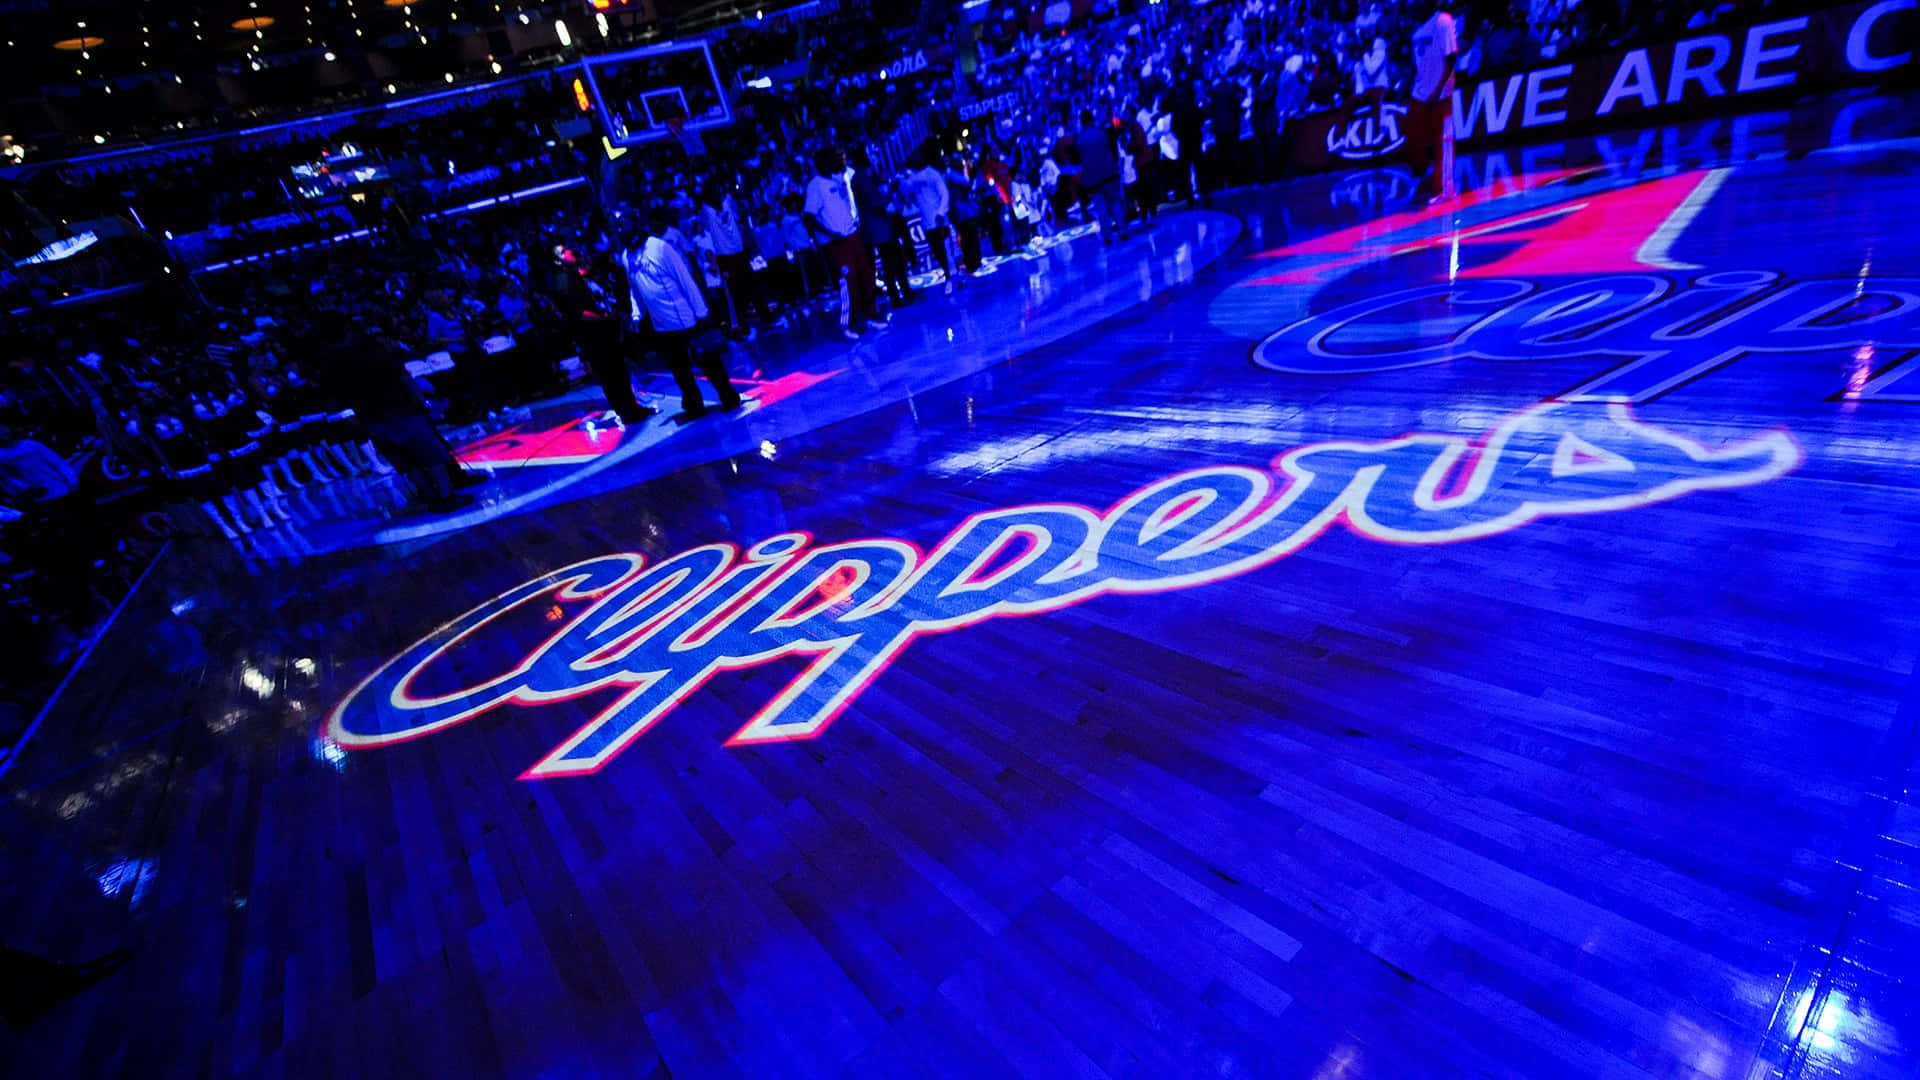 los angeles clippers staples center